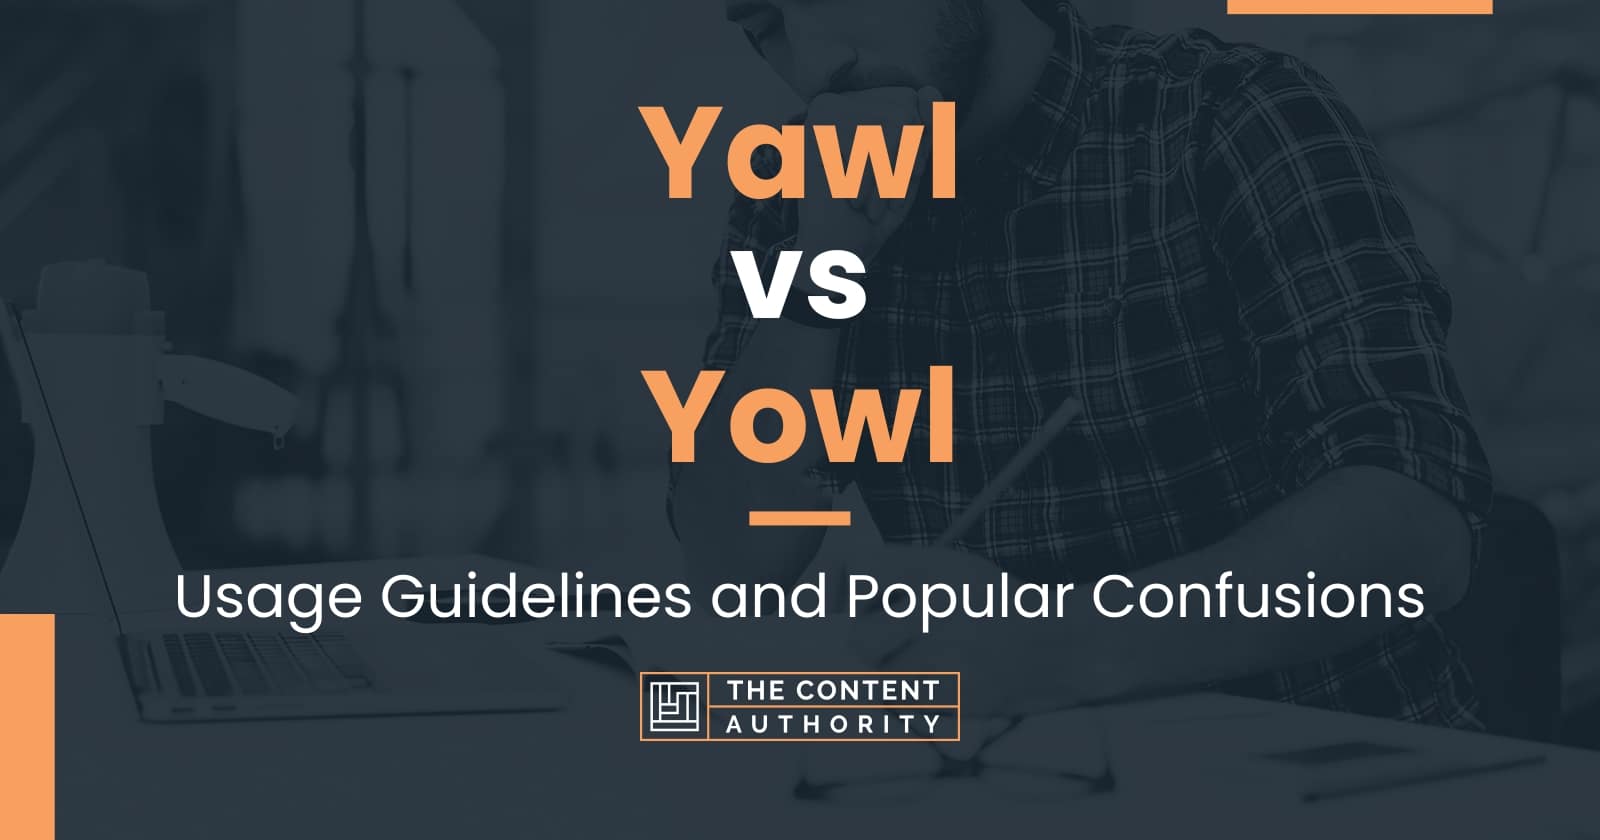 Yawl vs Yowl: Usage Guidelines and Popular Confusions